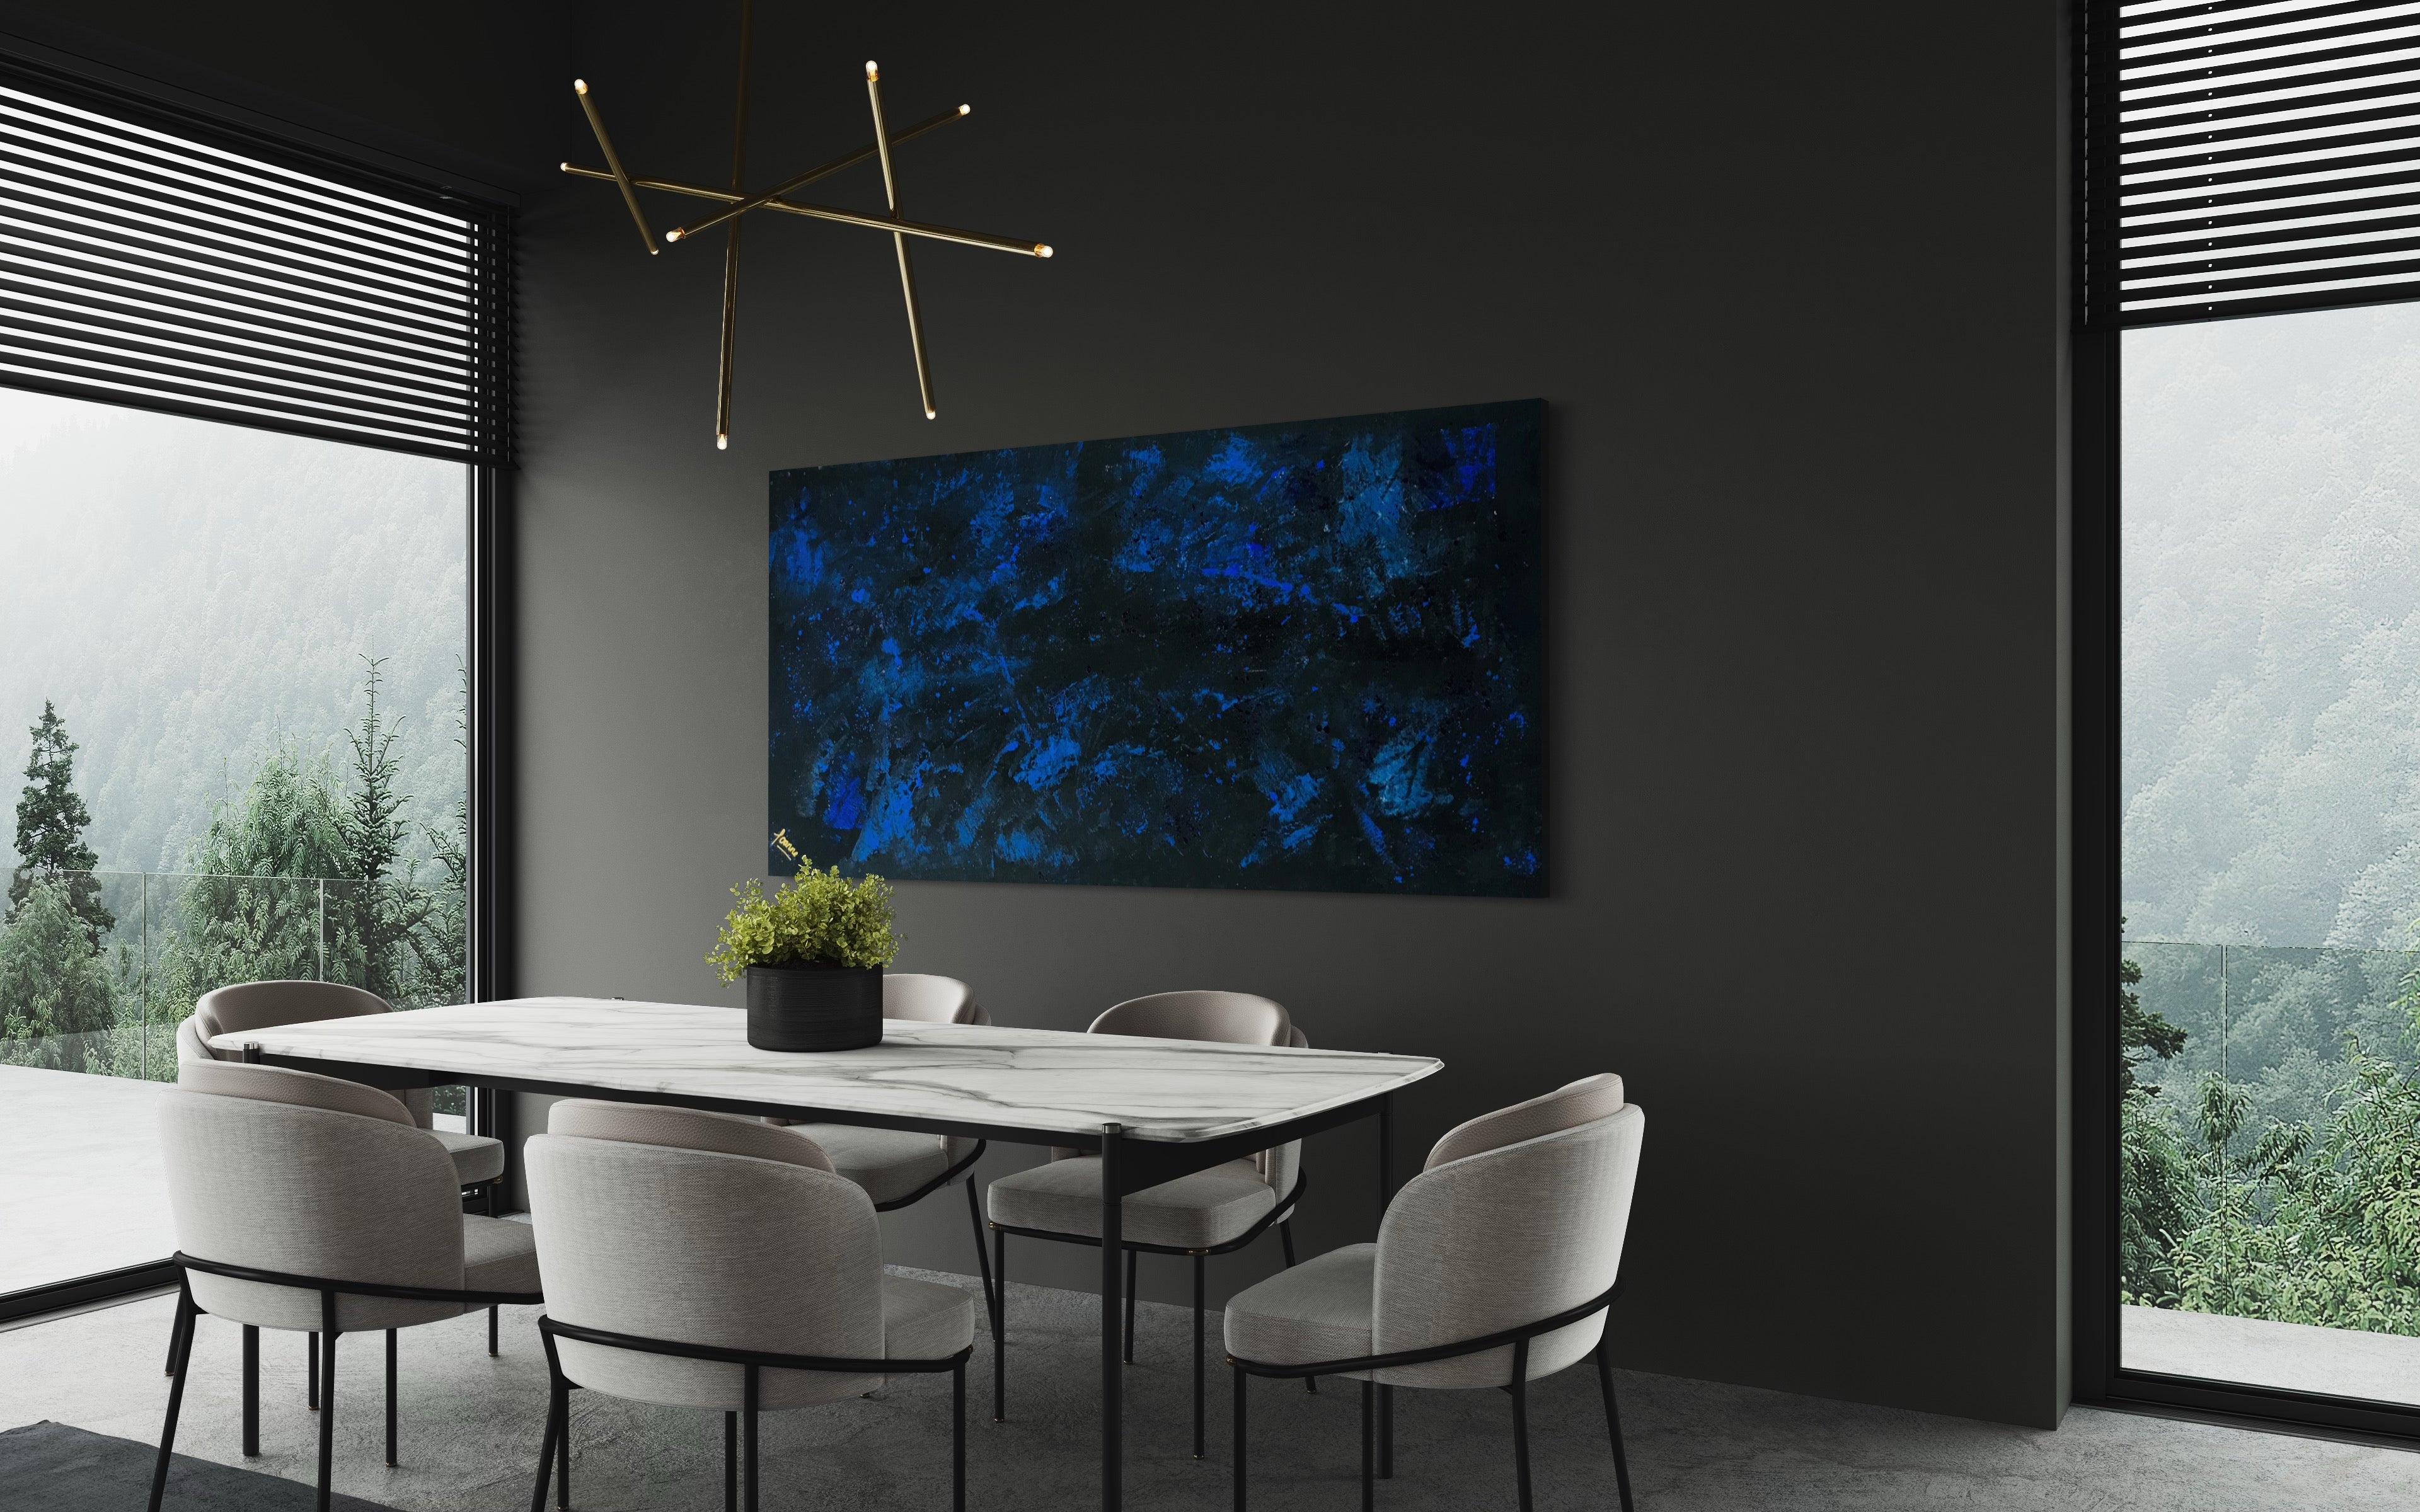 Midnight Sky 91 cm x 183 cm Blue Black Textured Abstract Painting by Joanne Daniel